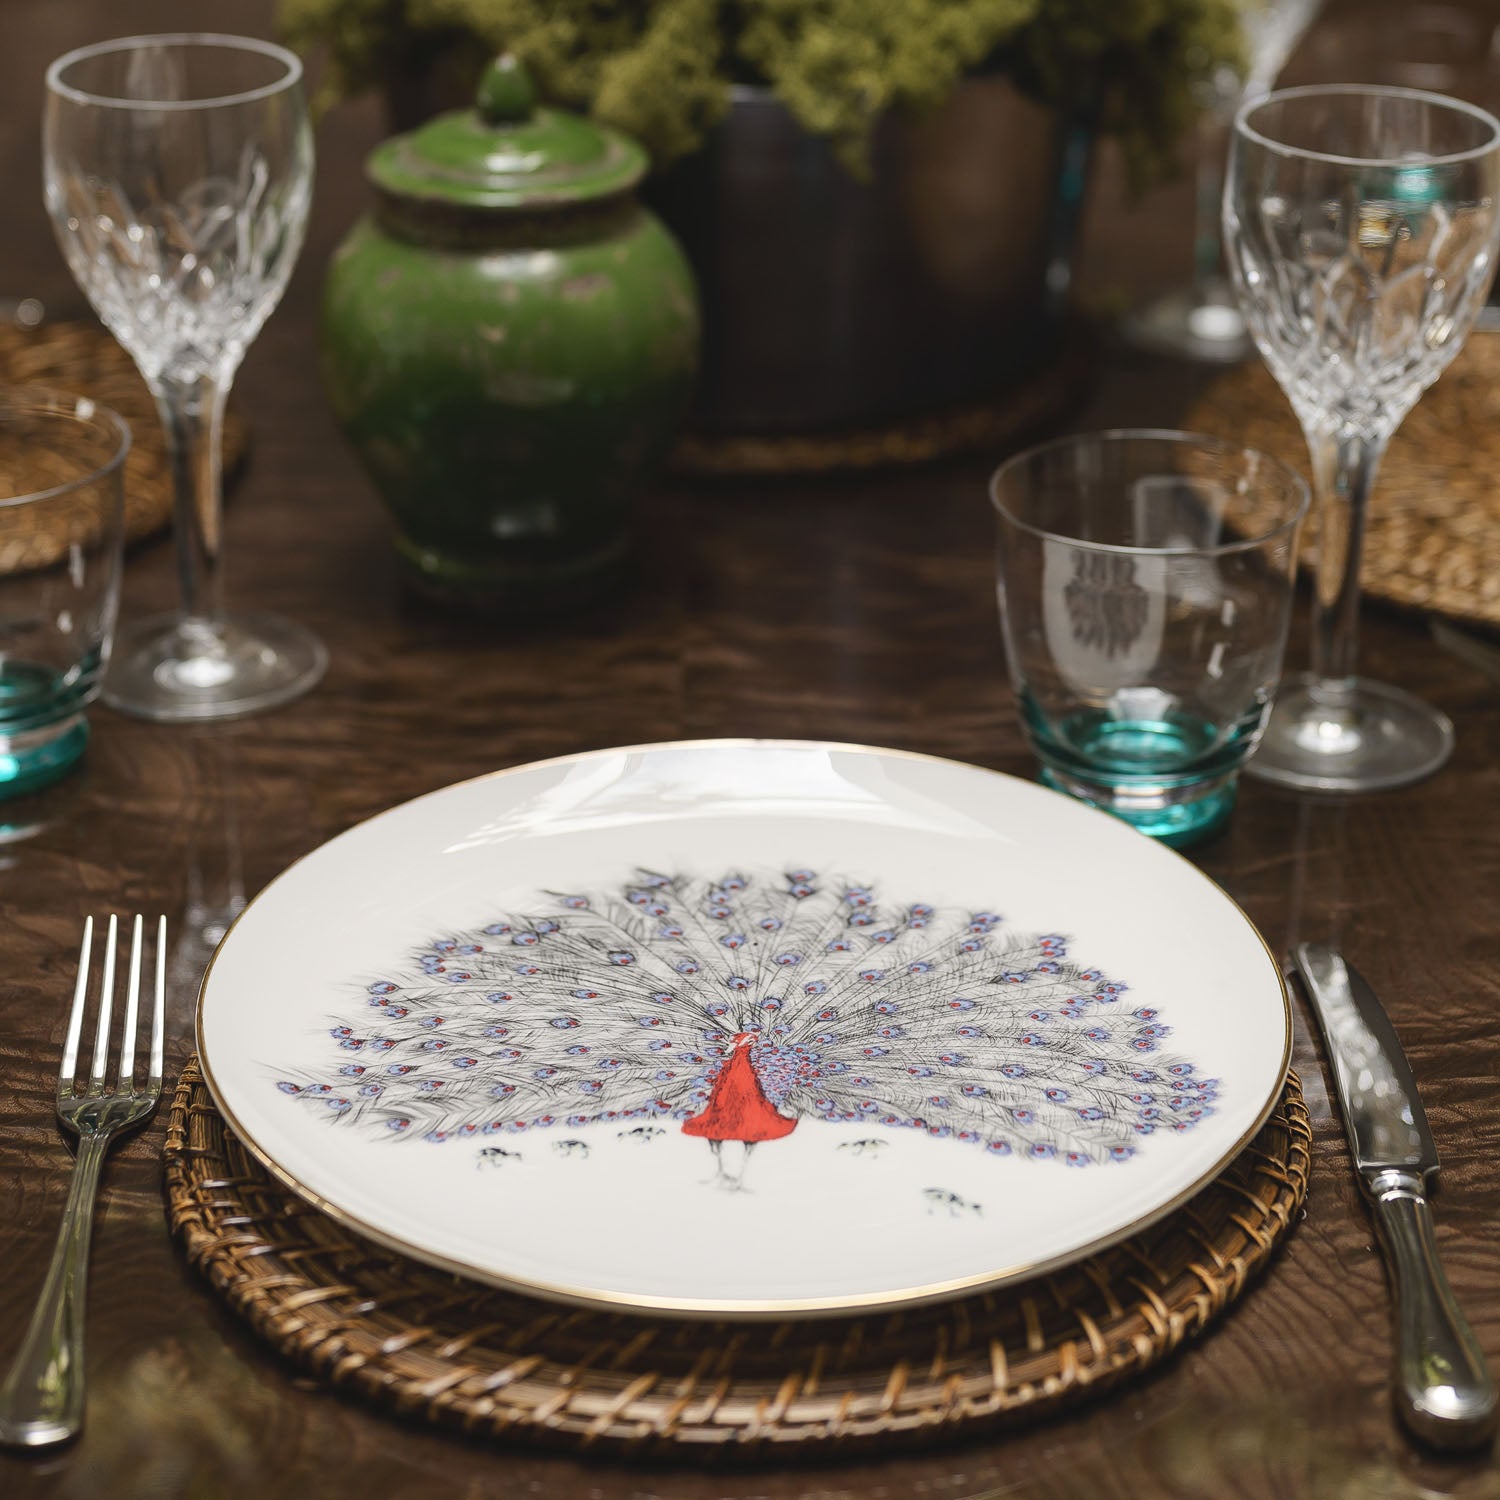 Peacock Bone Chine Plate in table setting